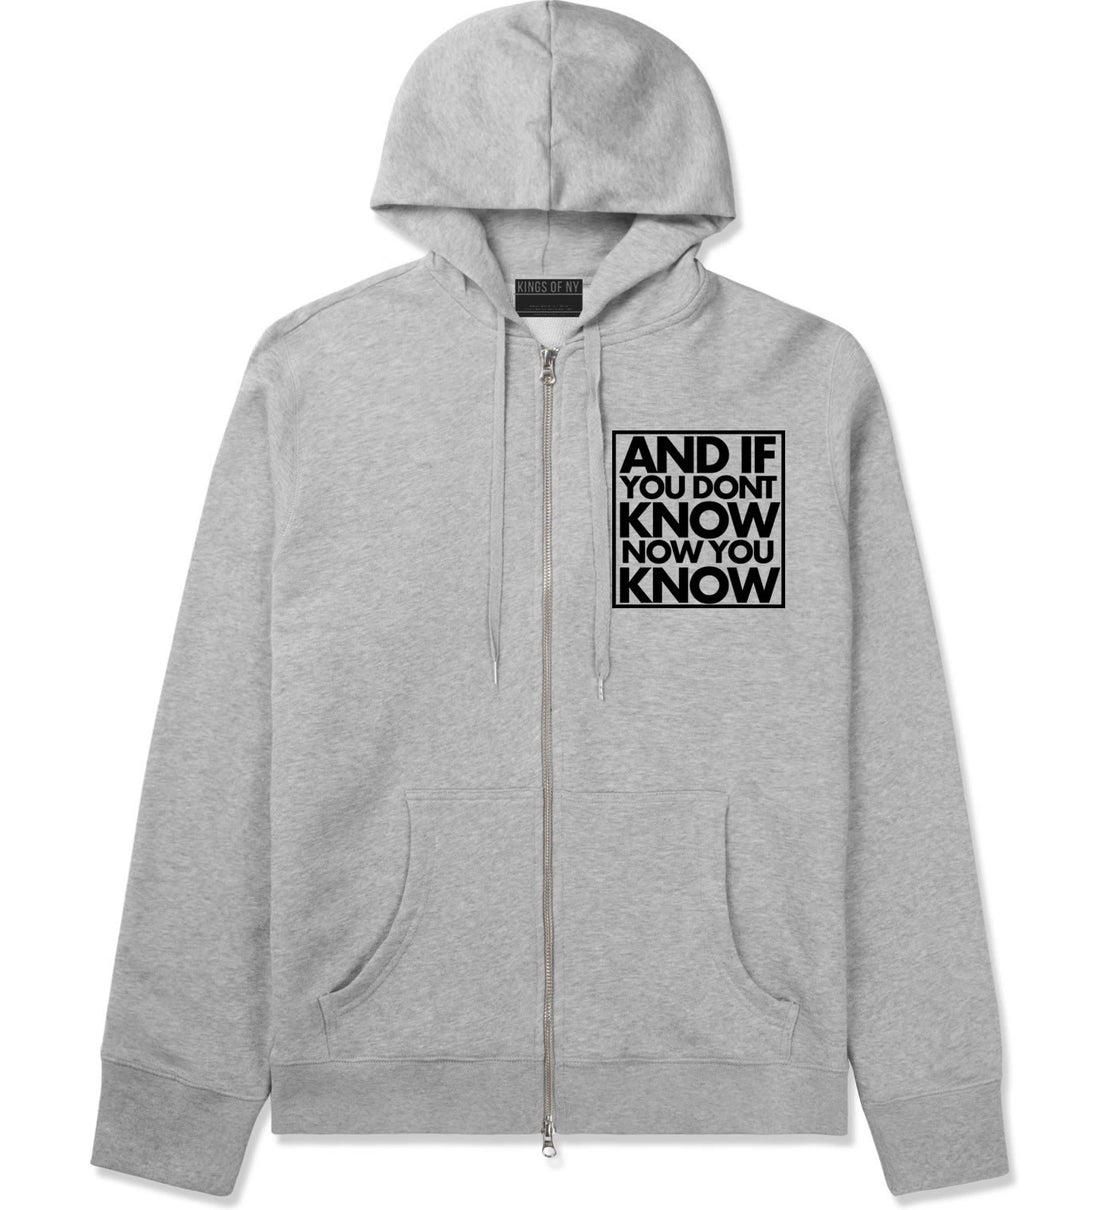 And If You Don't Know Now You Know Zip Up Hoodie in Grey By Kings Of NY